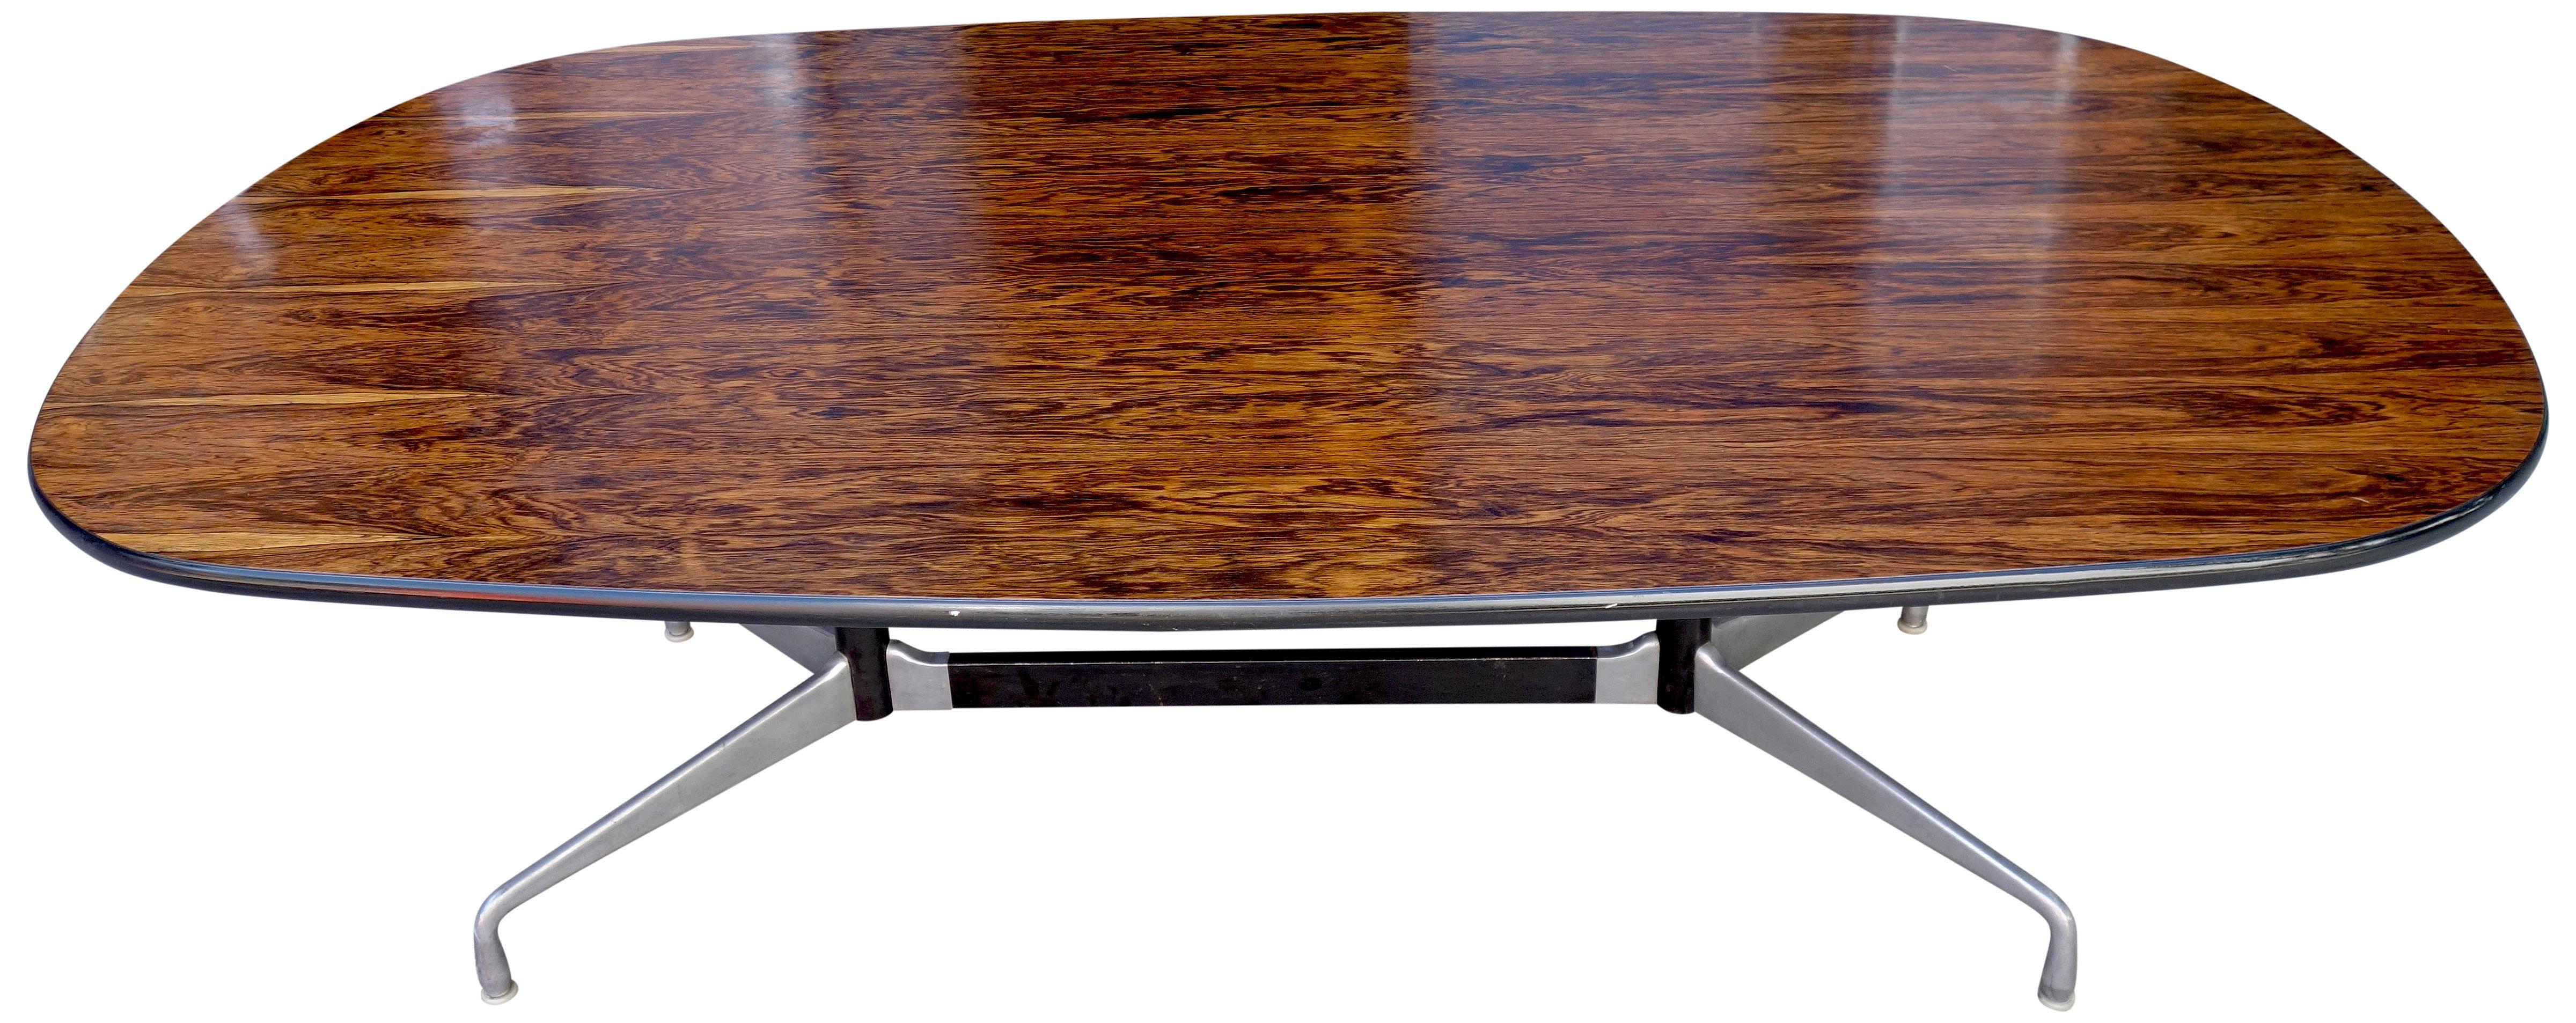 Mid-Century Modern Midcentury Segmented Base Table by Eames for Herman Miller